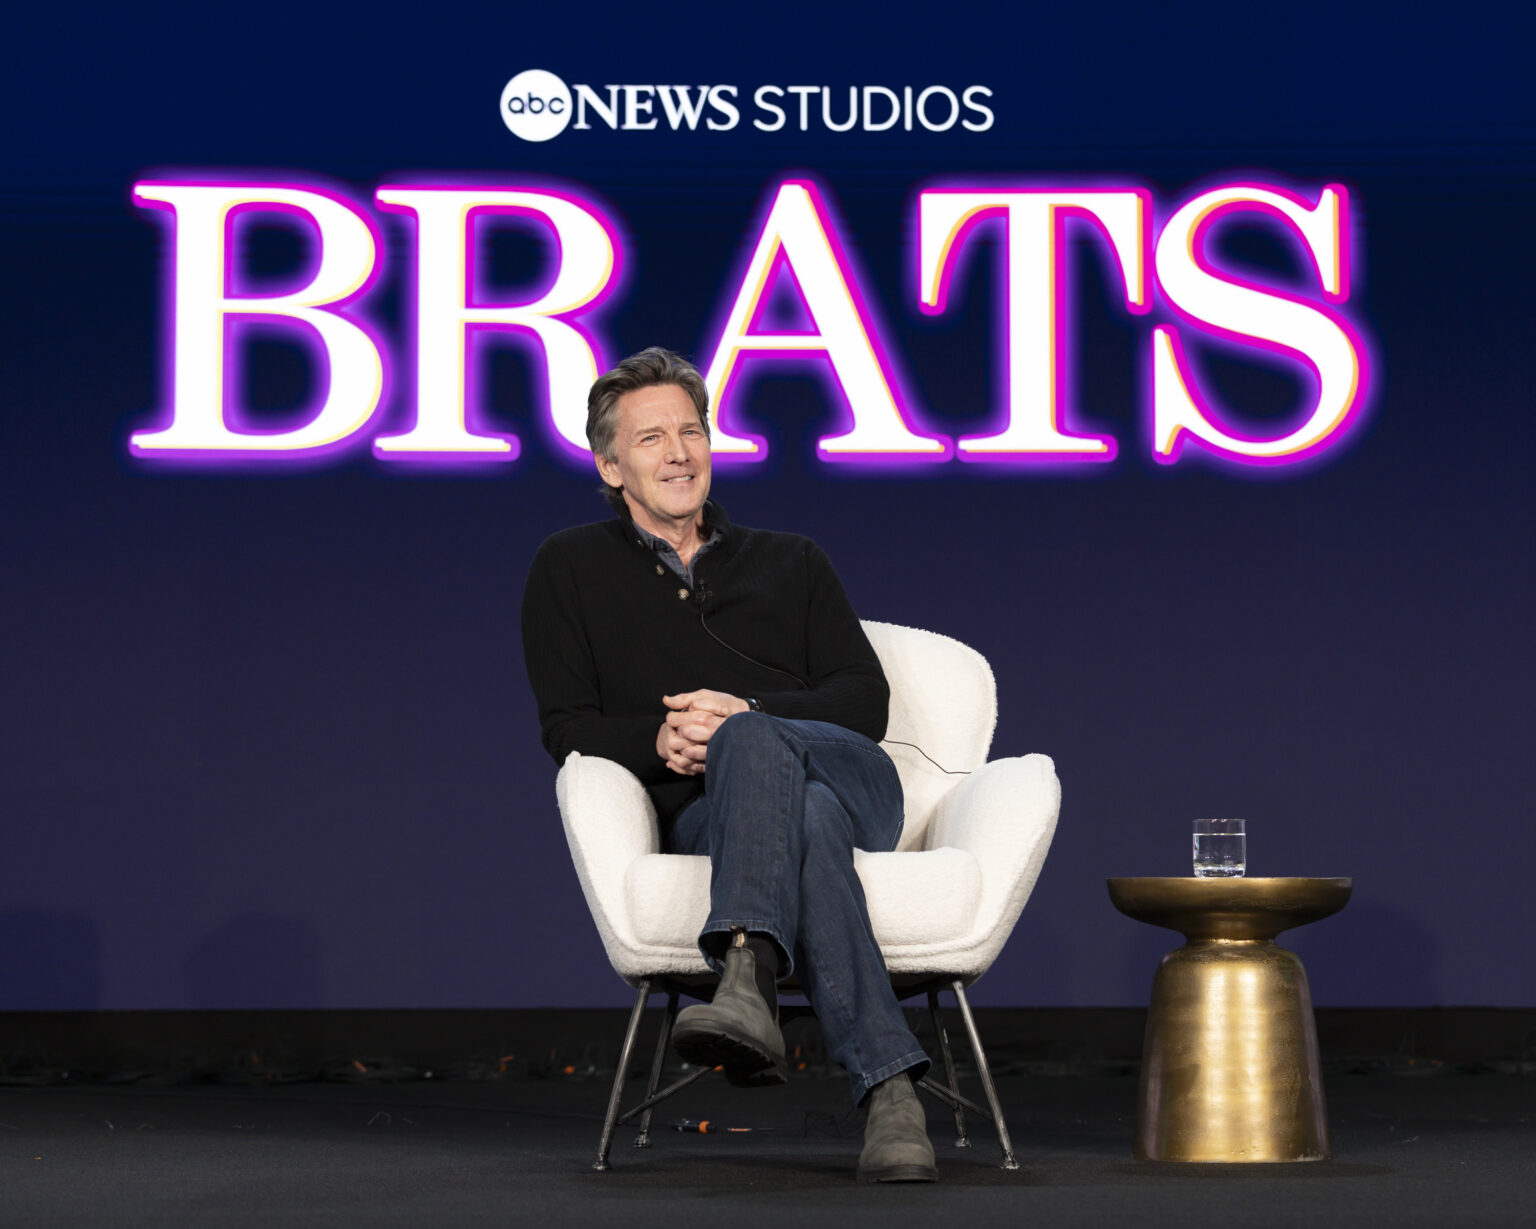 Andrew McCarthy on BRATS Hulu Documentary About the 'Brat Pack' Plus